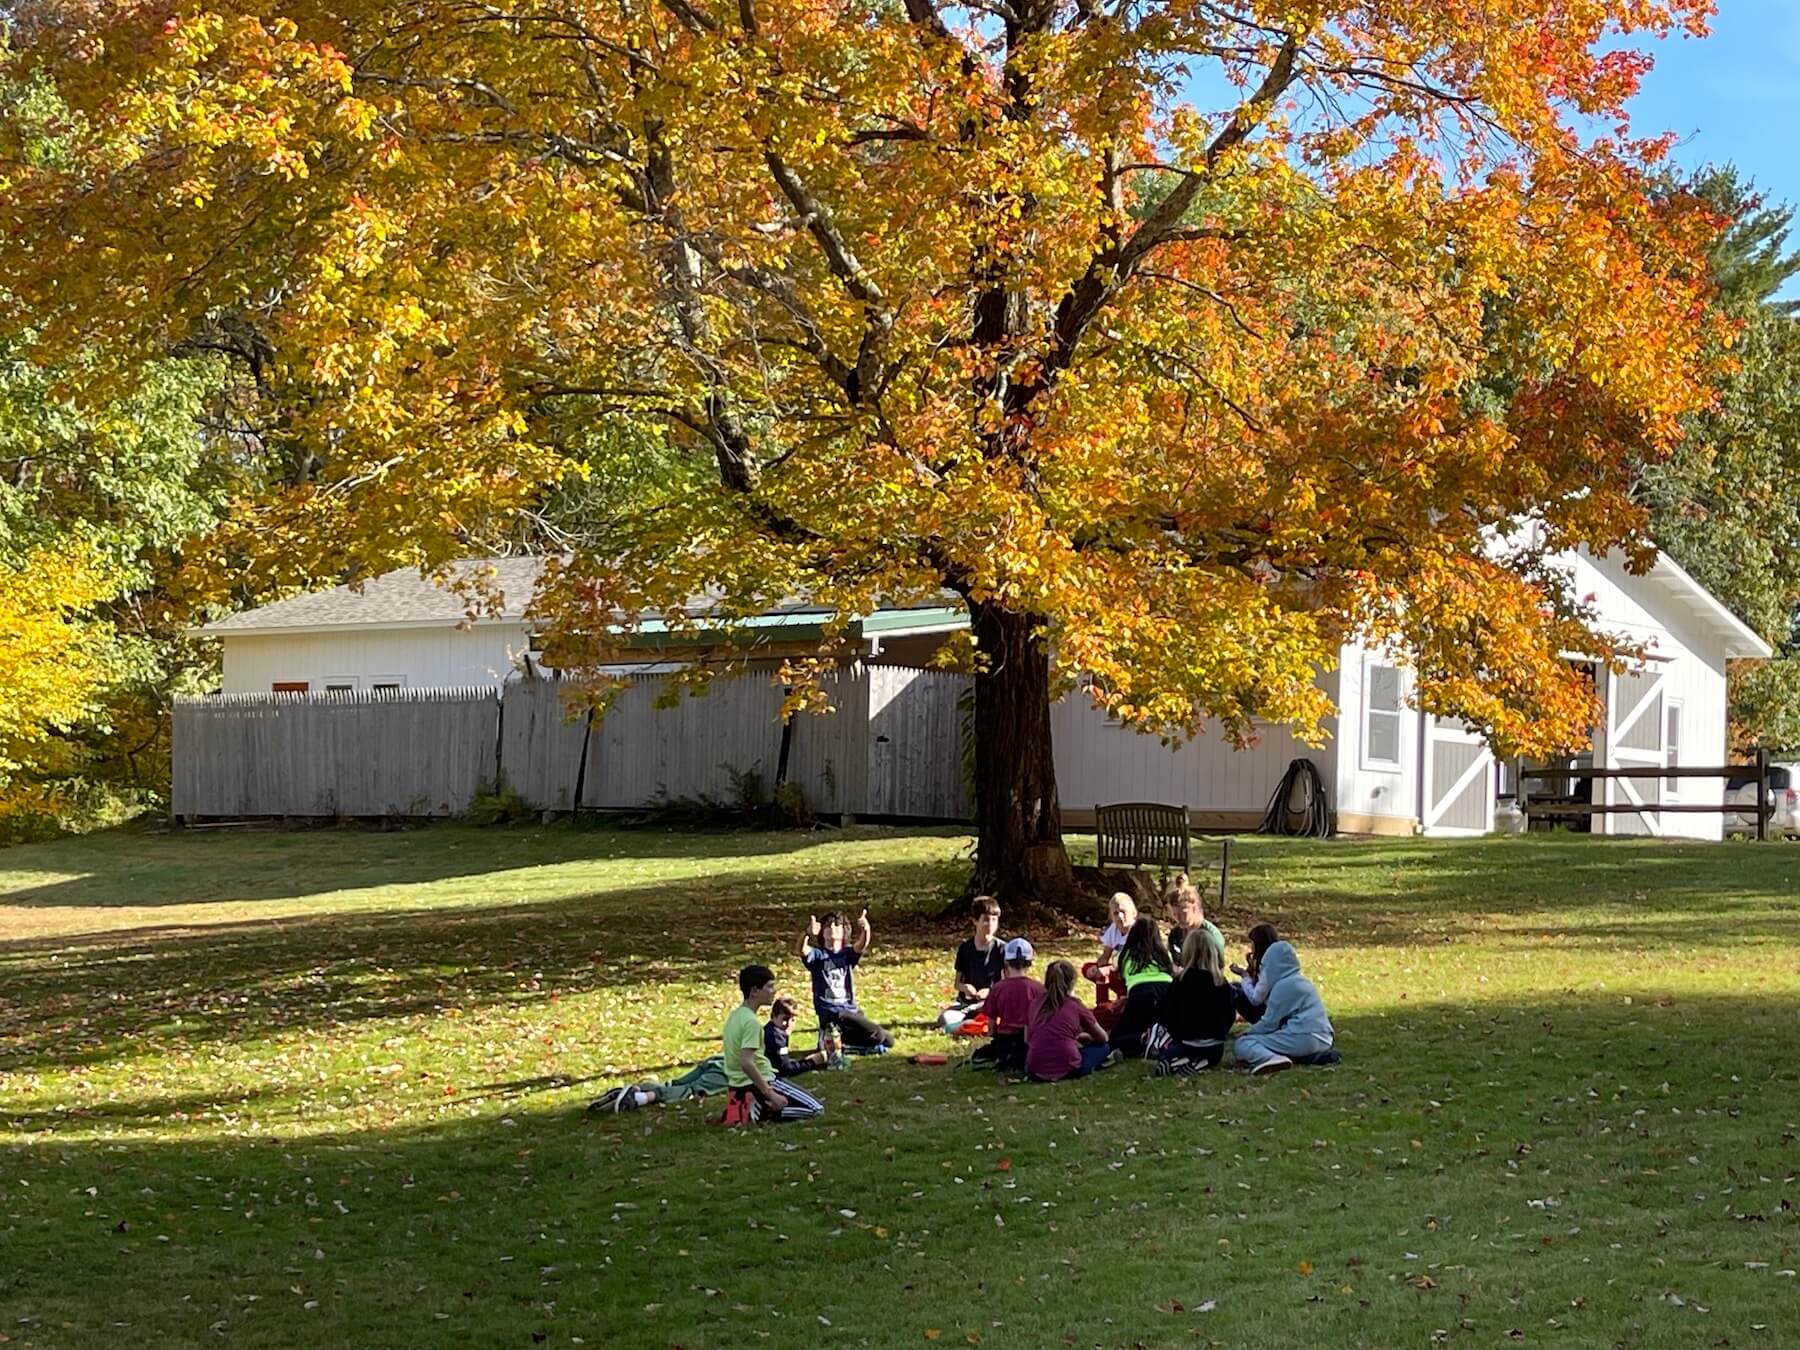 Ethical Culture students gather under at tree at Nature's Classroom. One student gives the camera a thumbs up!